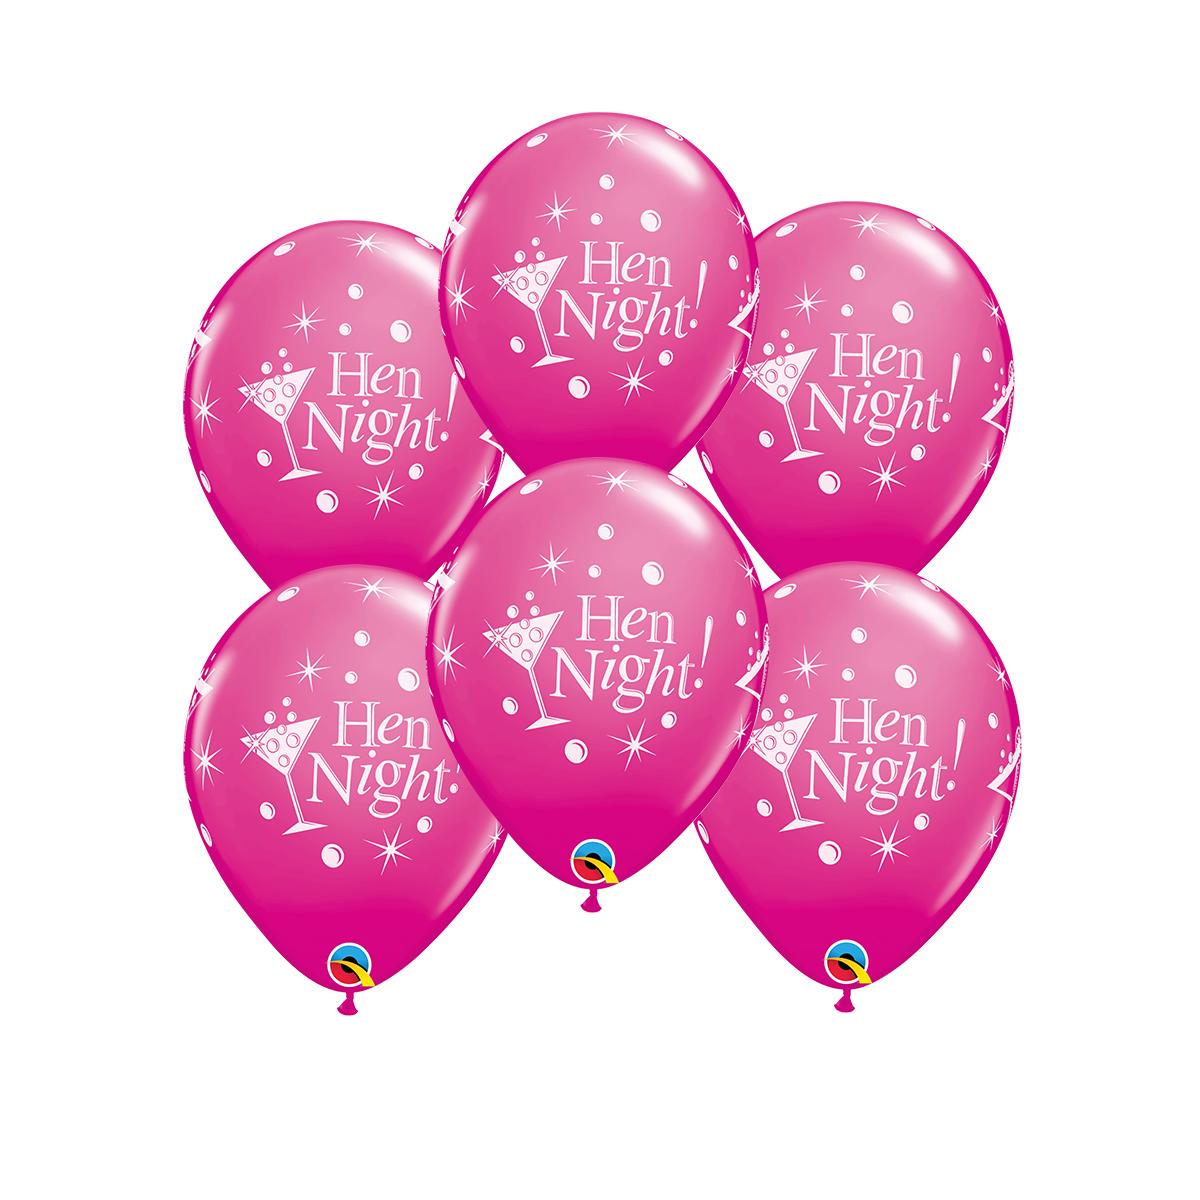 Image Of A Packet Of 6 Hen Night Latex Balloons